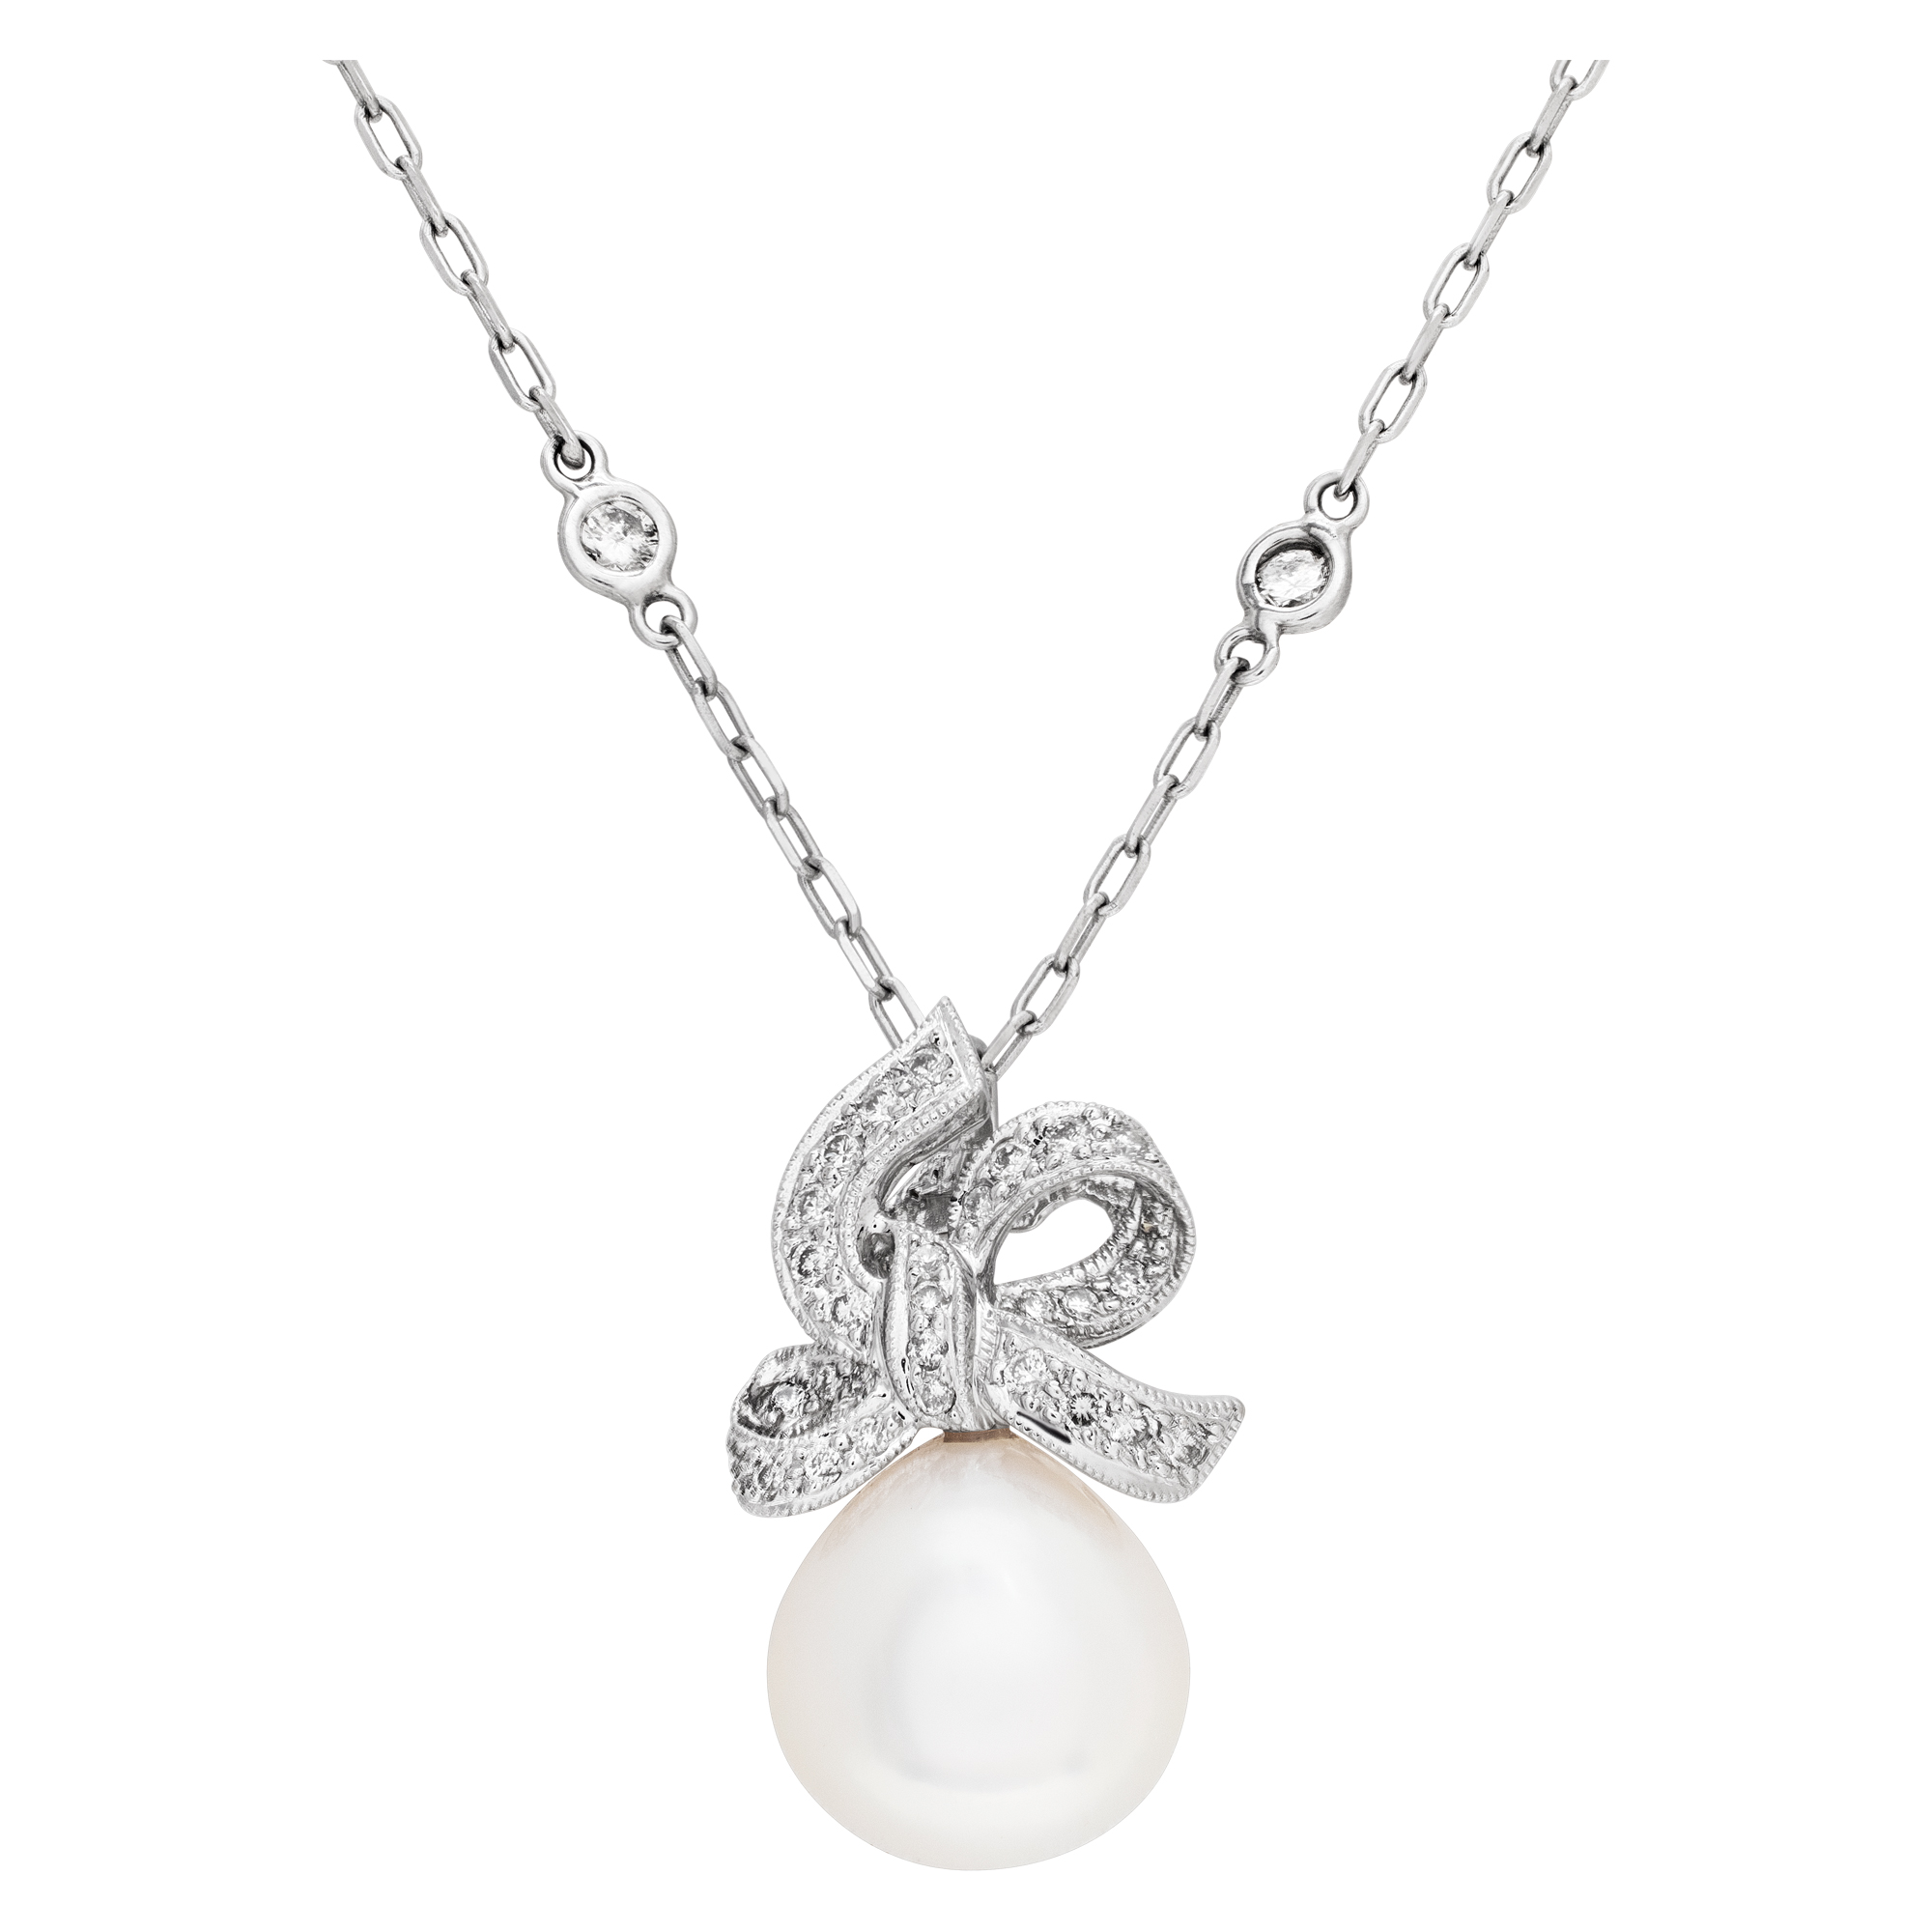 Fresh water pearl (12 x 12.5mm) and diamond pendant in 18k white gold with 14k white gold diamonds by the yard chain image 1